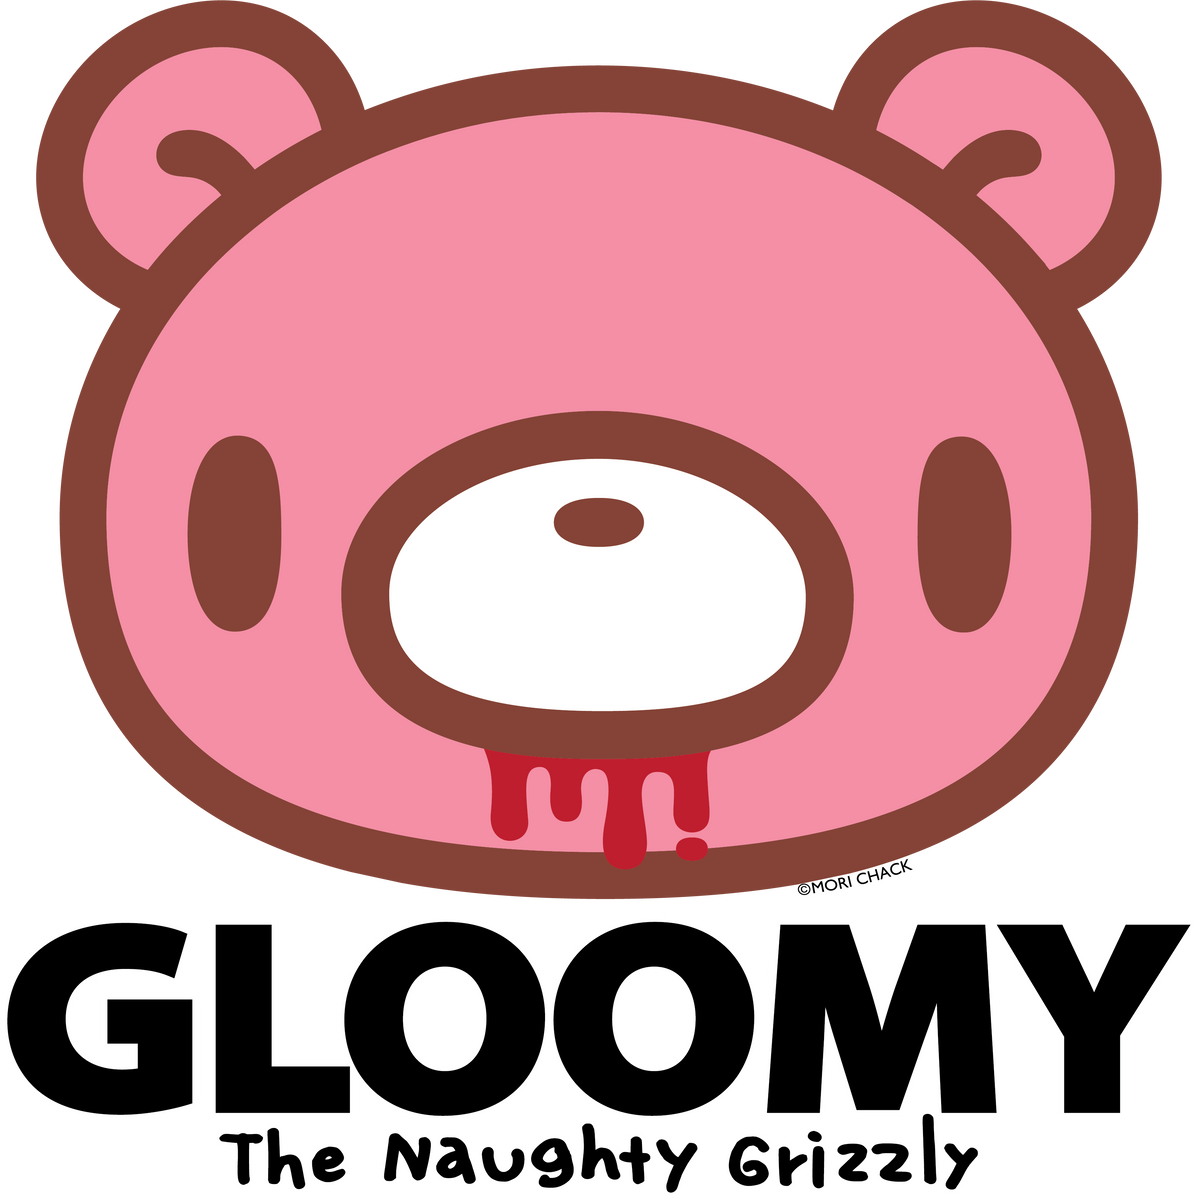 Newest Releases! - Gloomy Bear Official